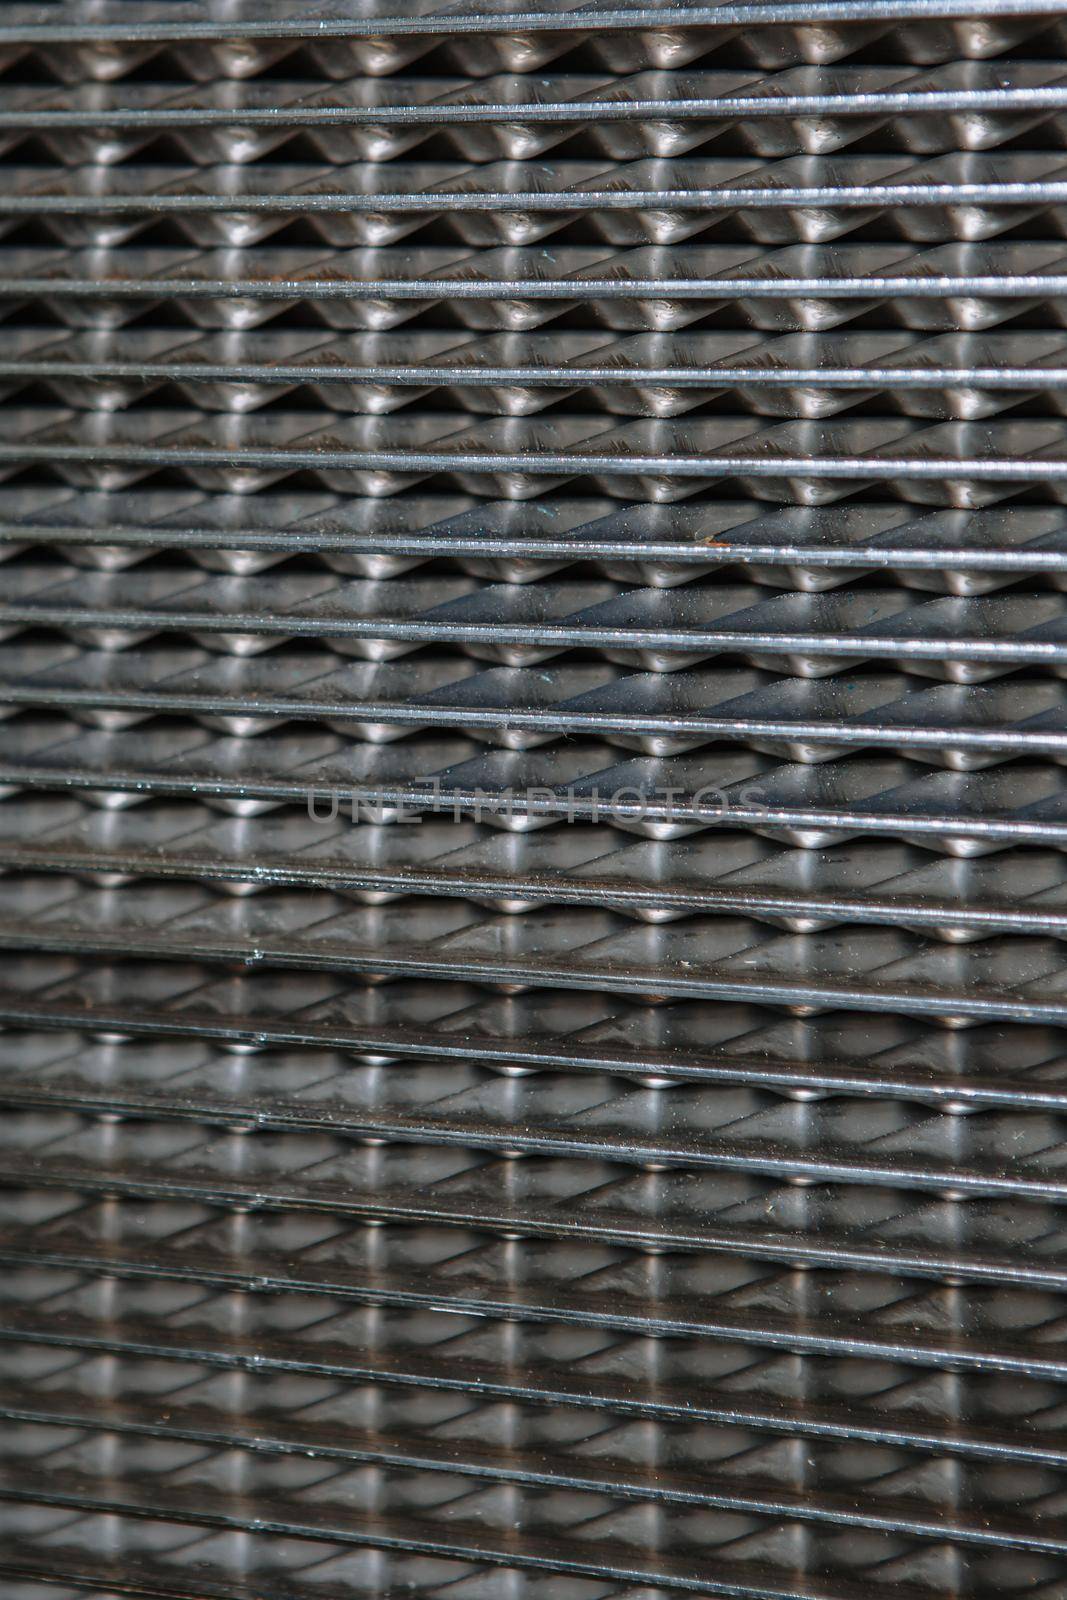 A metal heat exchanger grid consisting of small cells. by deandy